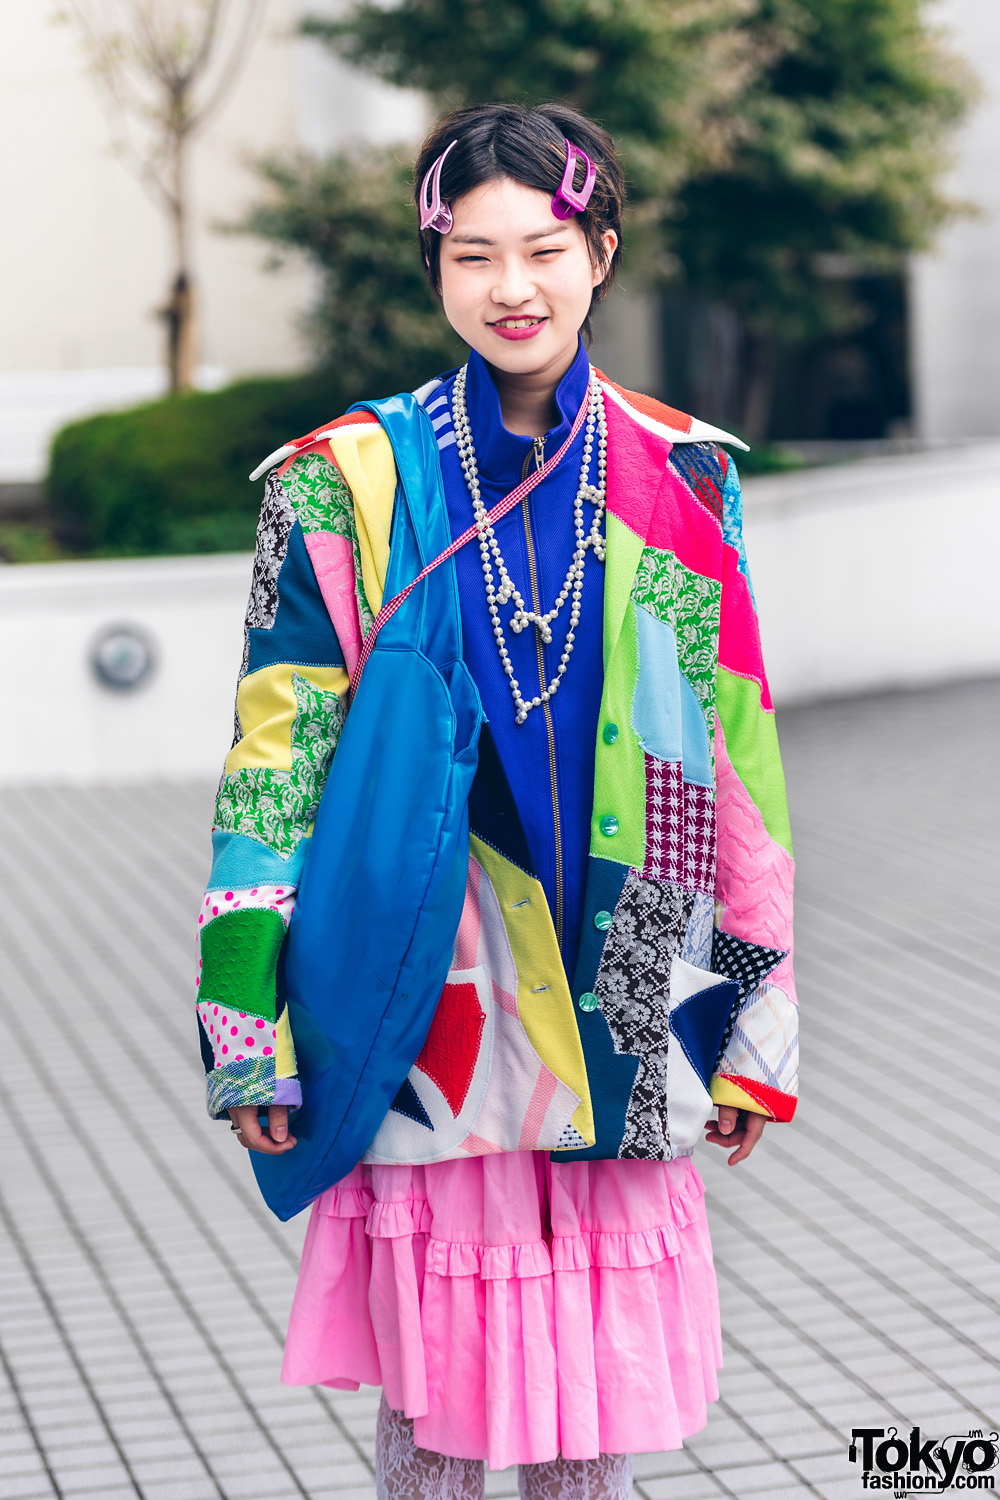 Colorful Bunka College Street Style w/ Pixie Cut & Oversized Hair Clips ...